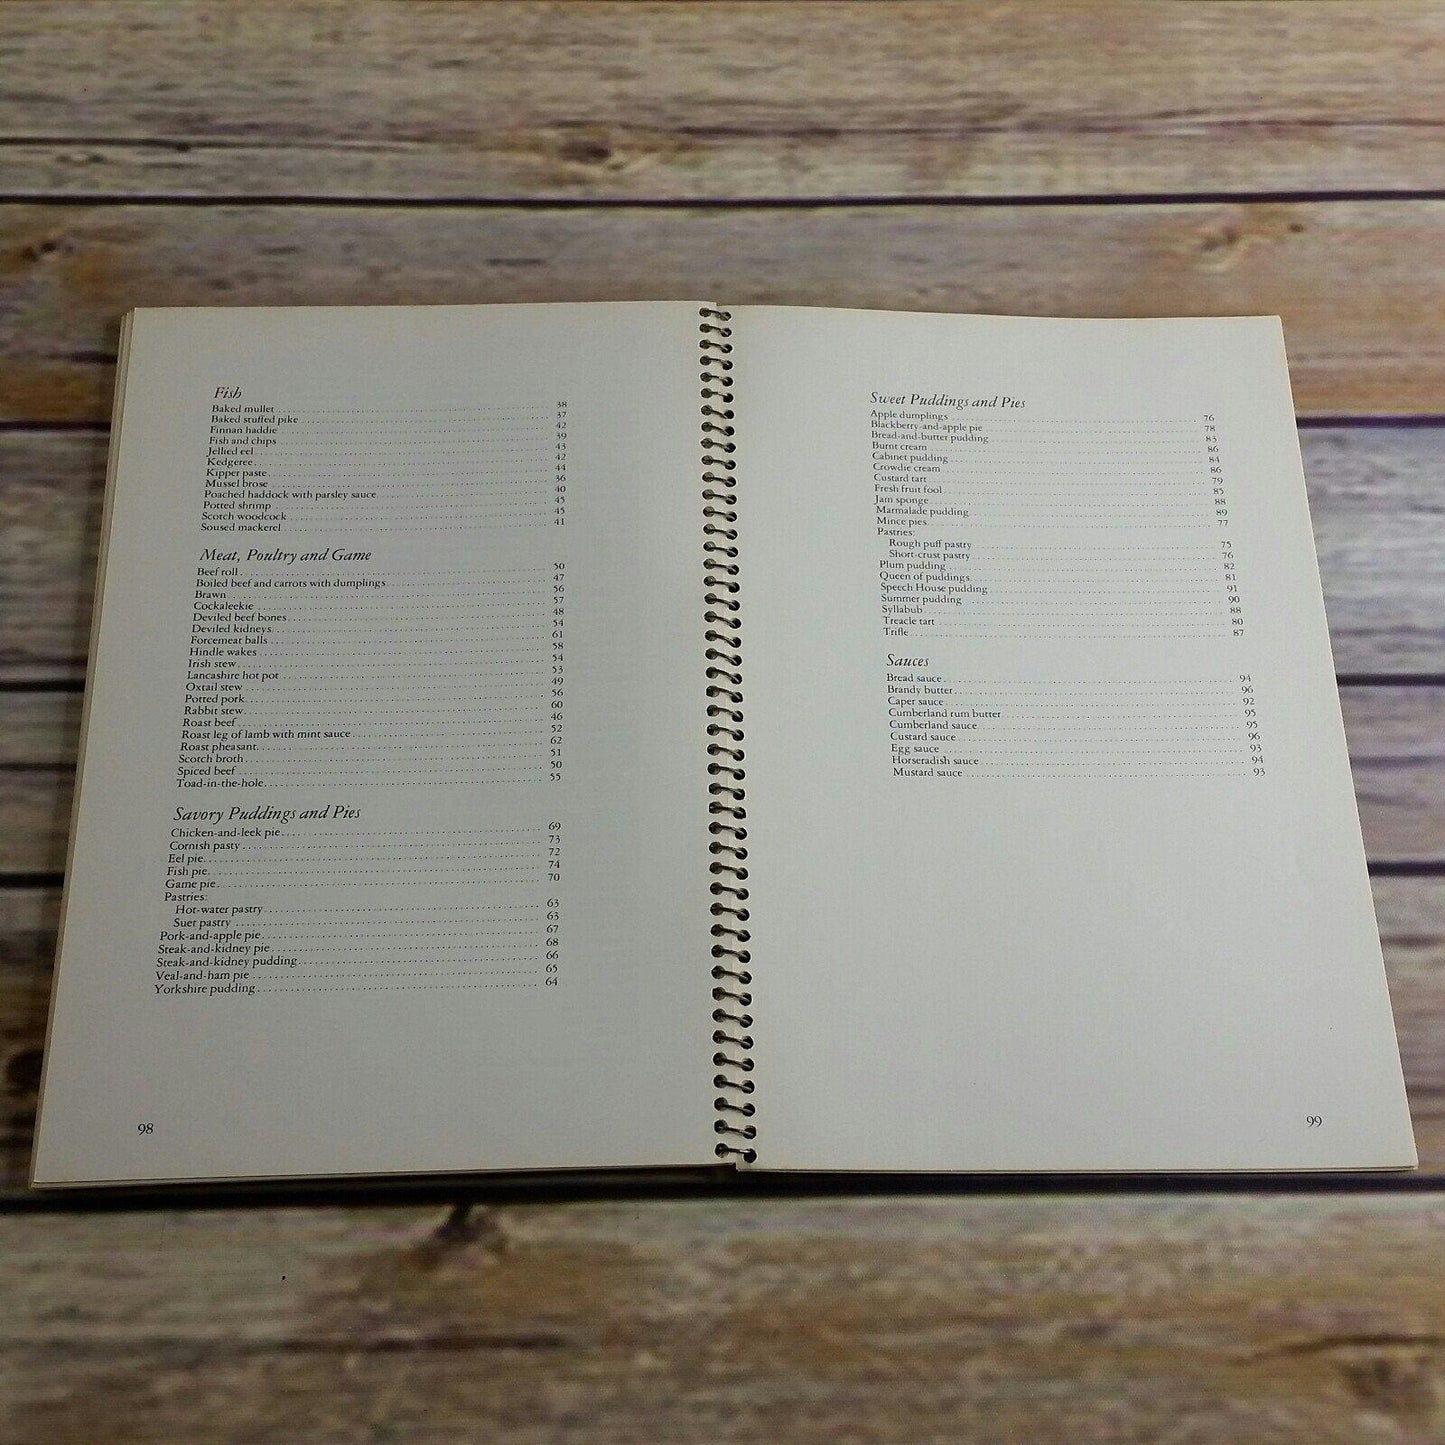 Vtg British Cookbook The Cooking of the British Isles Time Life Books Foods of the World 1969 Spiral Bound Great Britain Islands